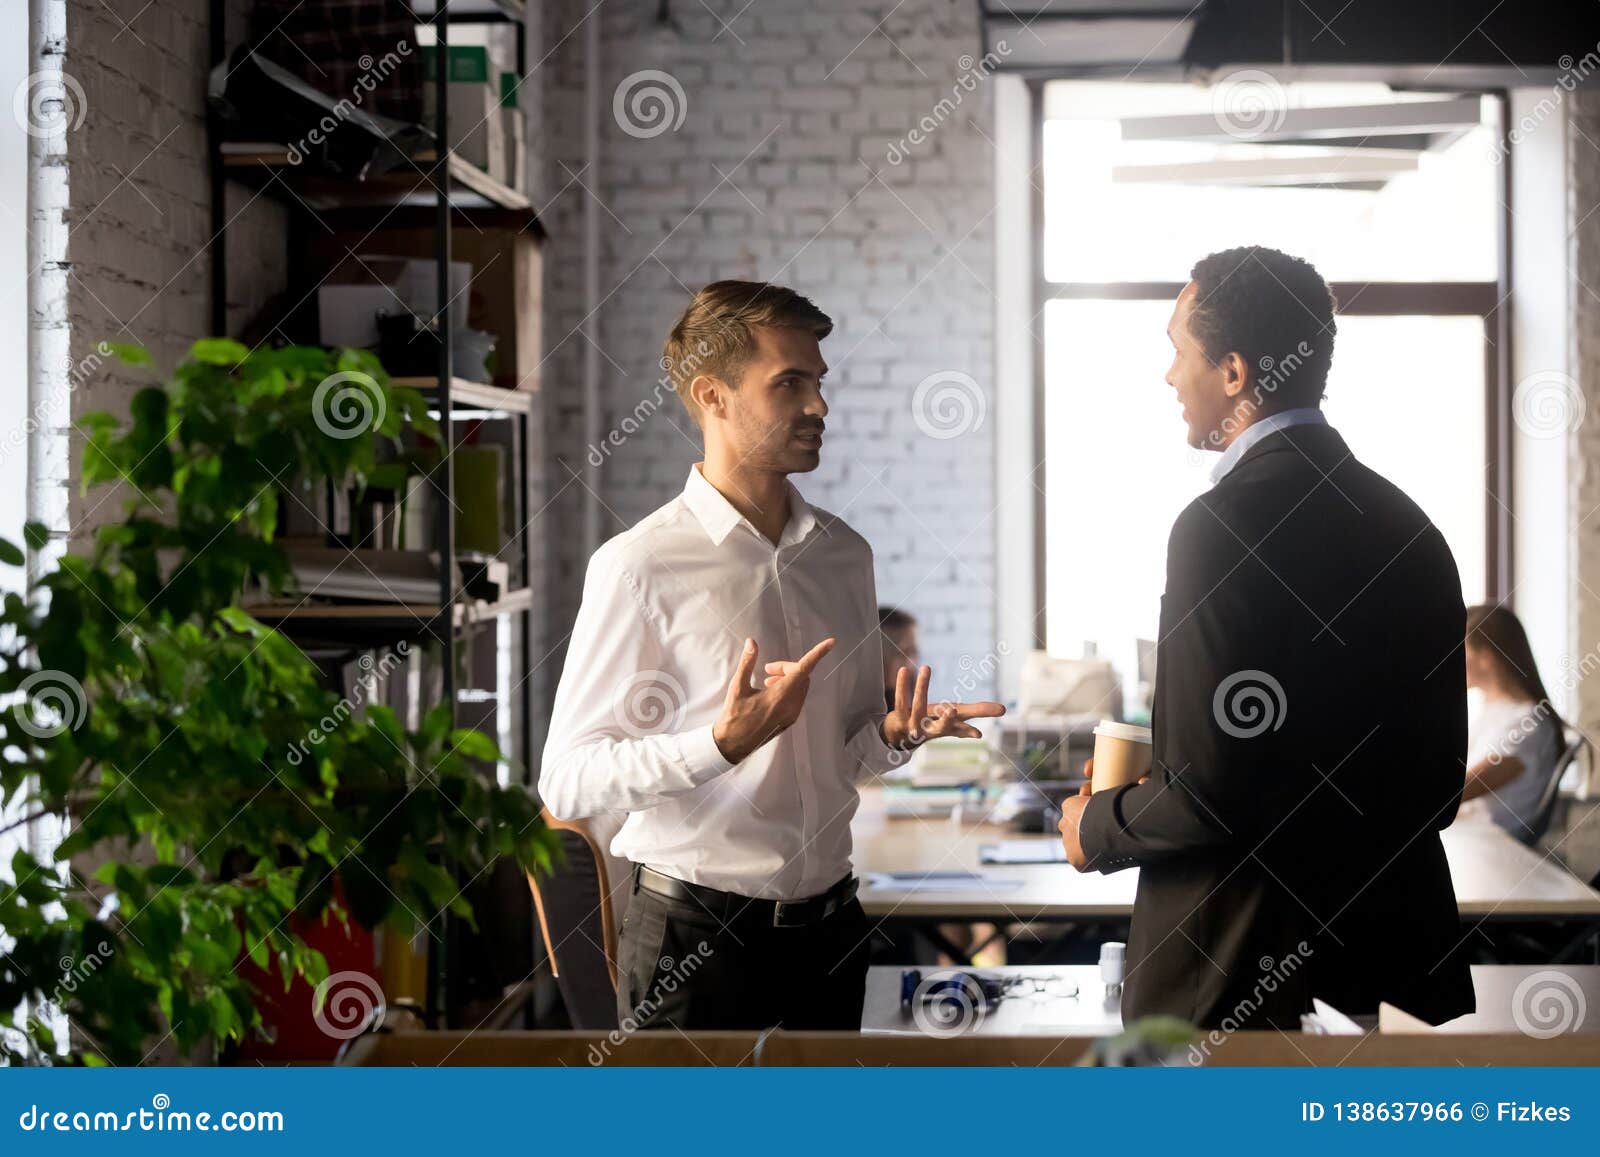 colleagues standing having casual conversation in office